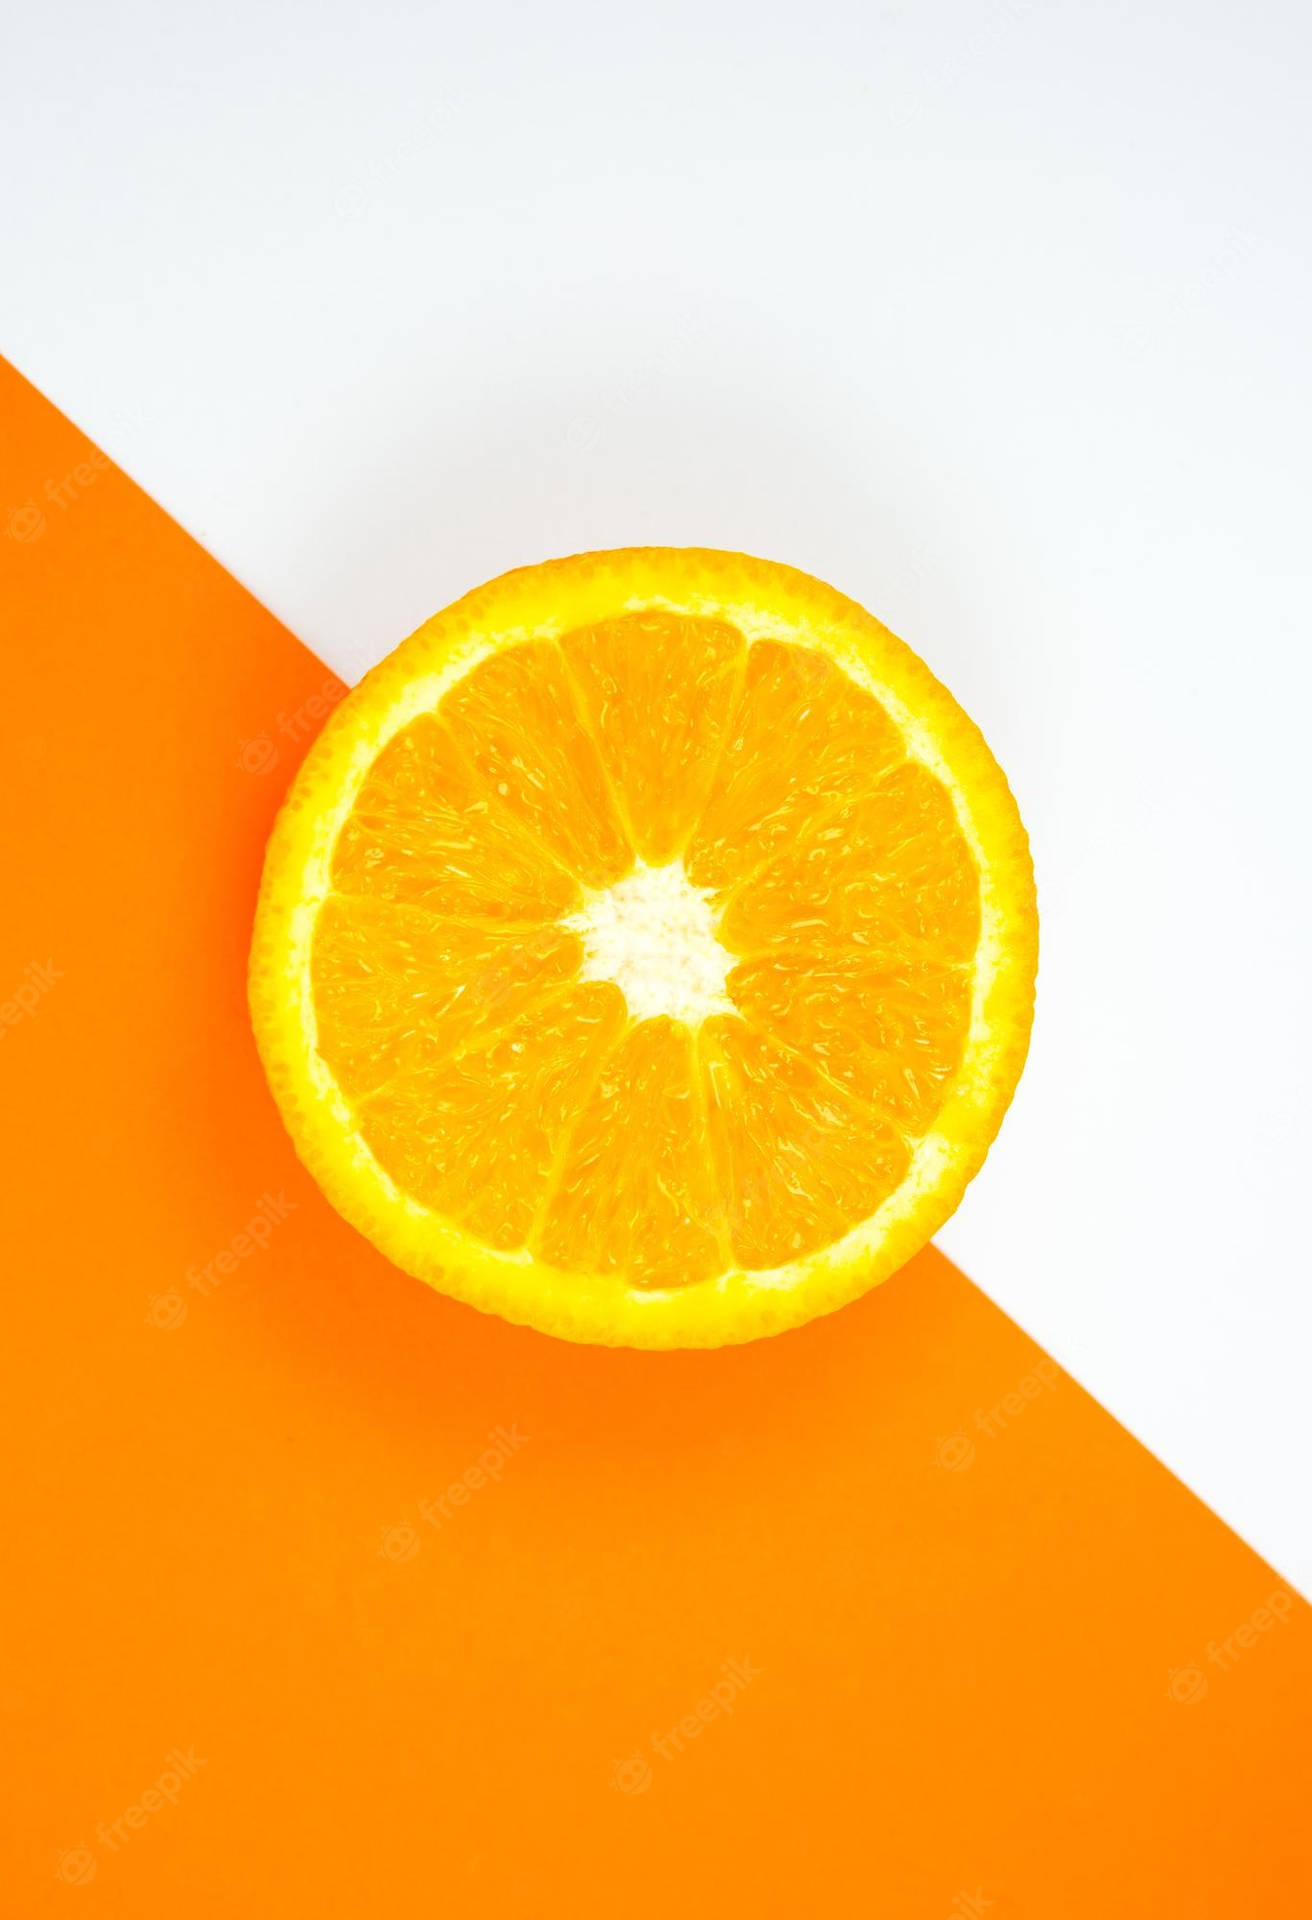 Bright and Solid Orange - a perfect way to start the day Wallpaper